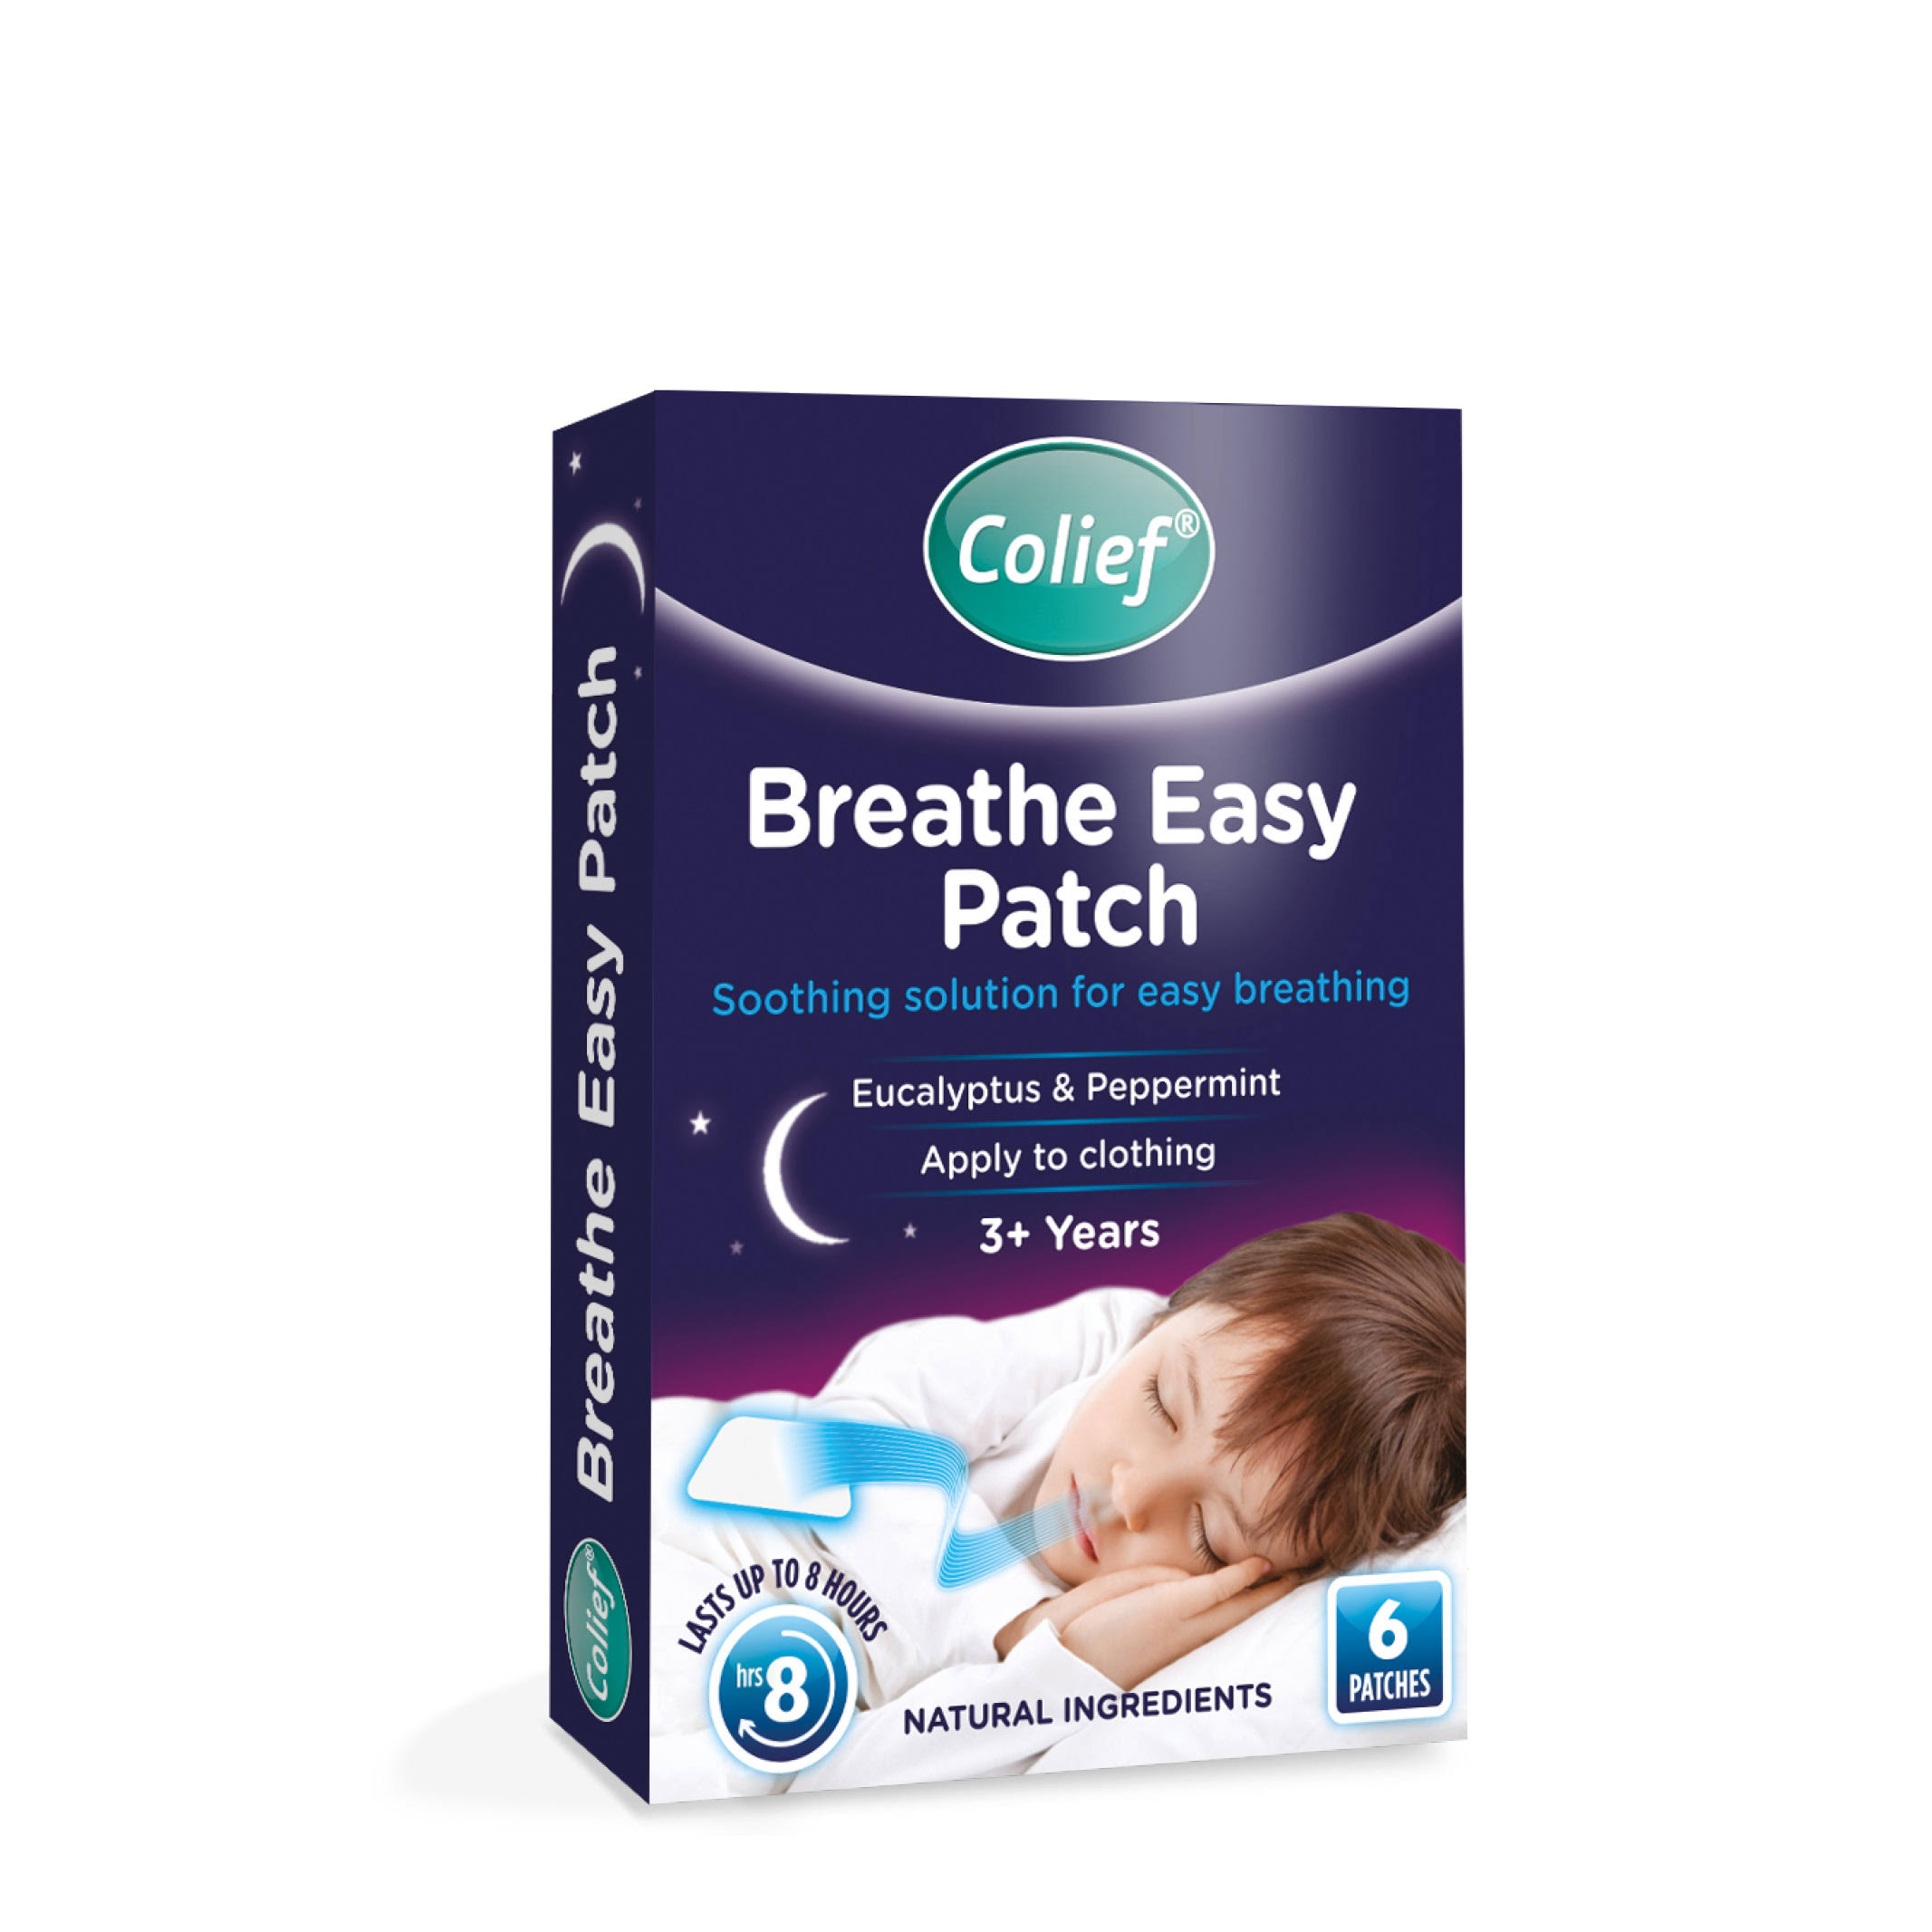 Colief Breathe Easy Patch - 6ct